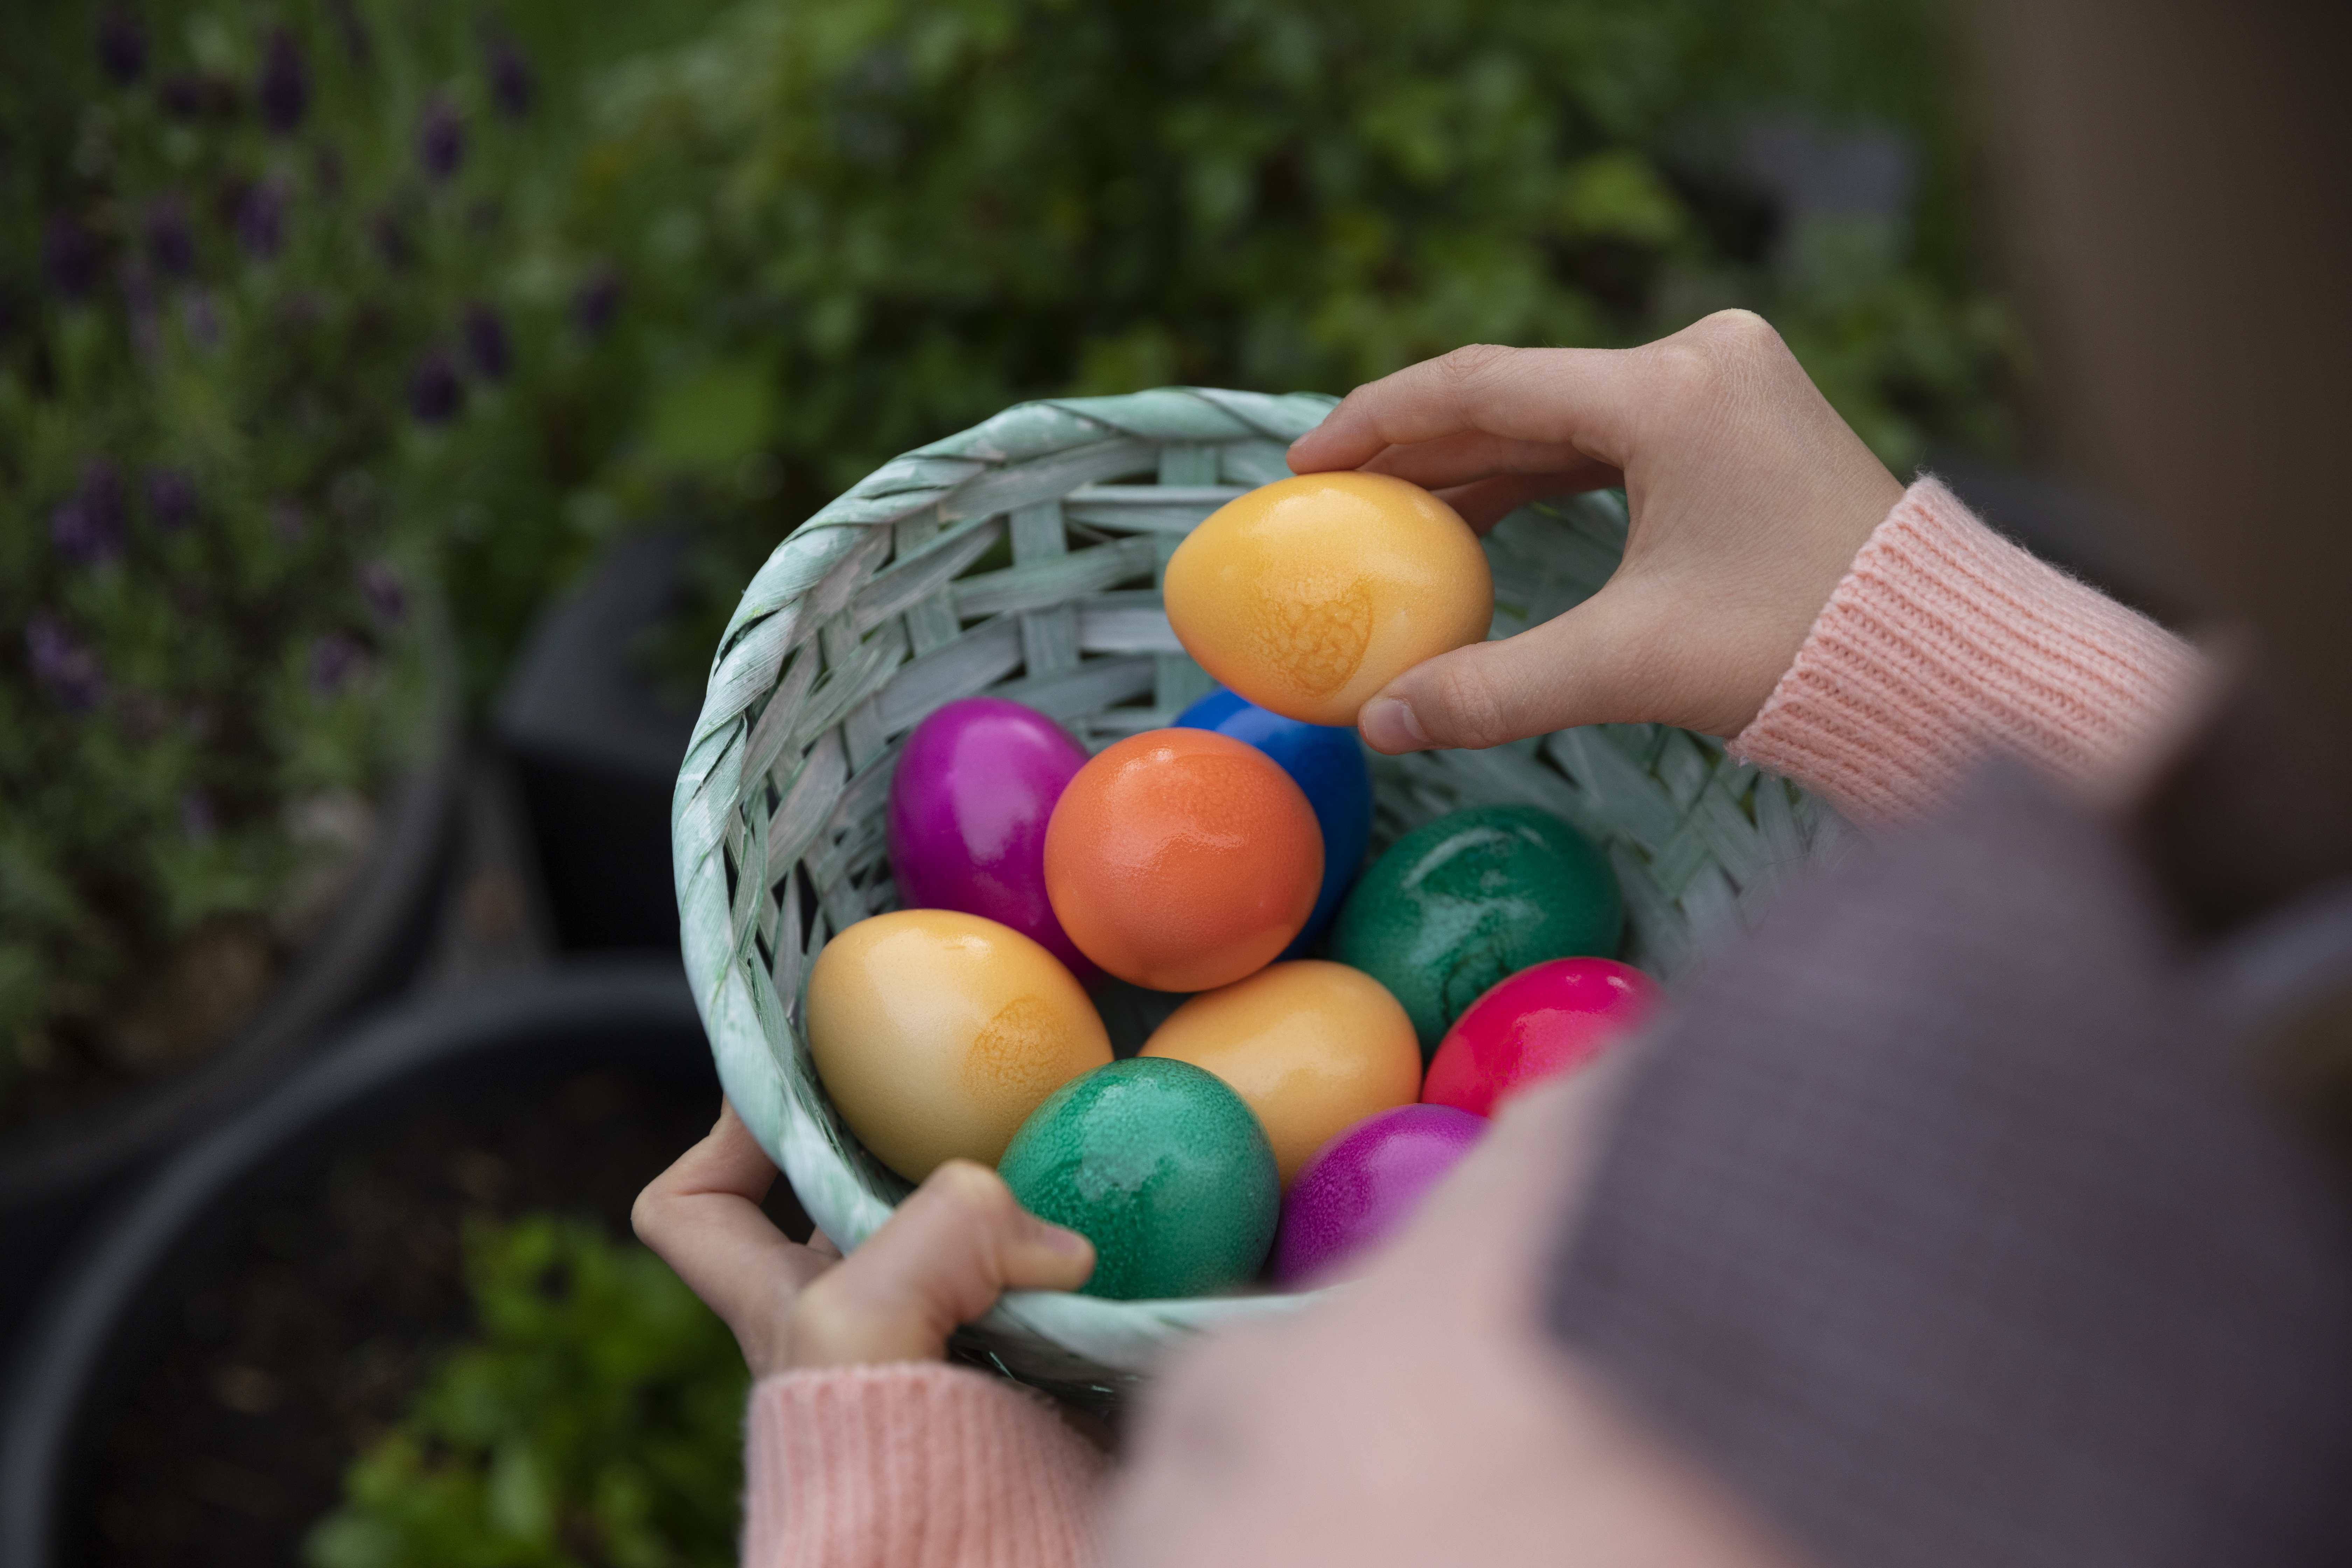 Where to find the Easter Bunny and Easter egg hunts in North Texas
this weekend